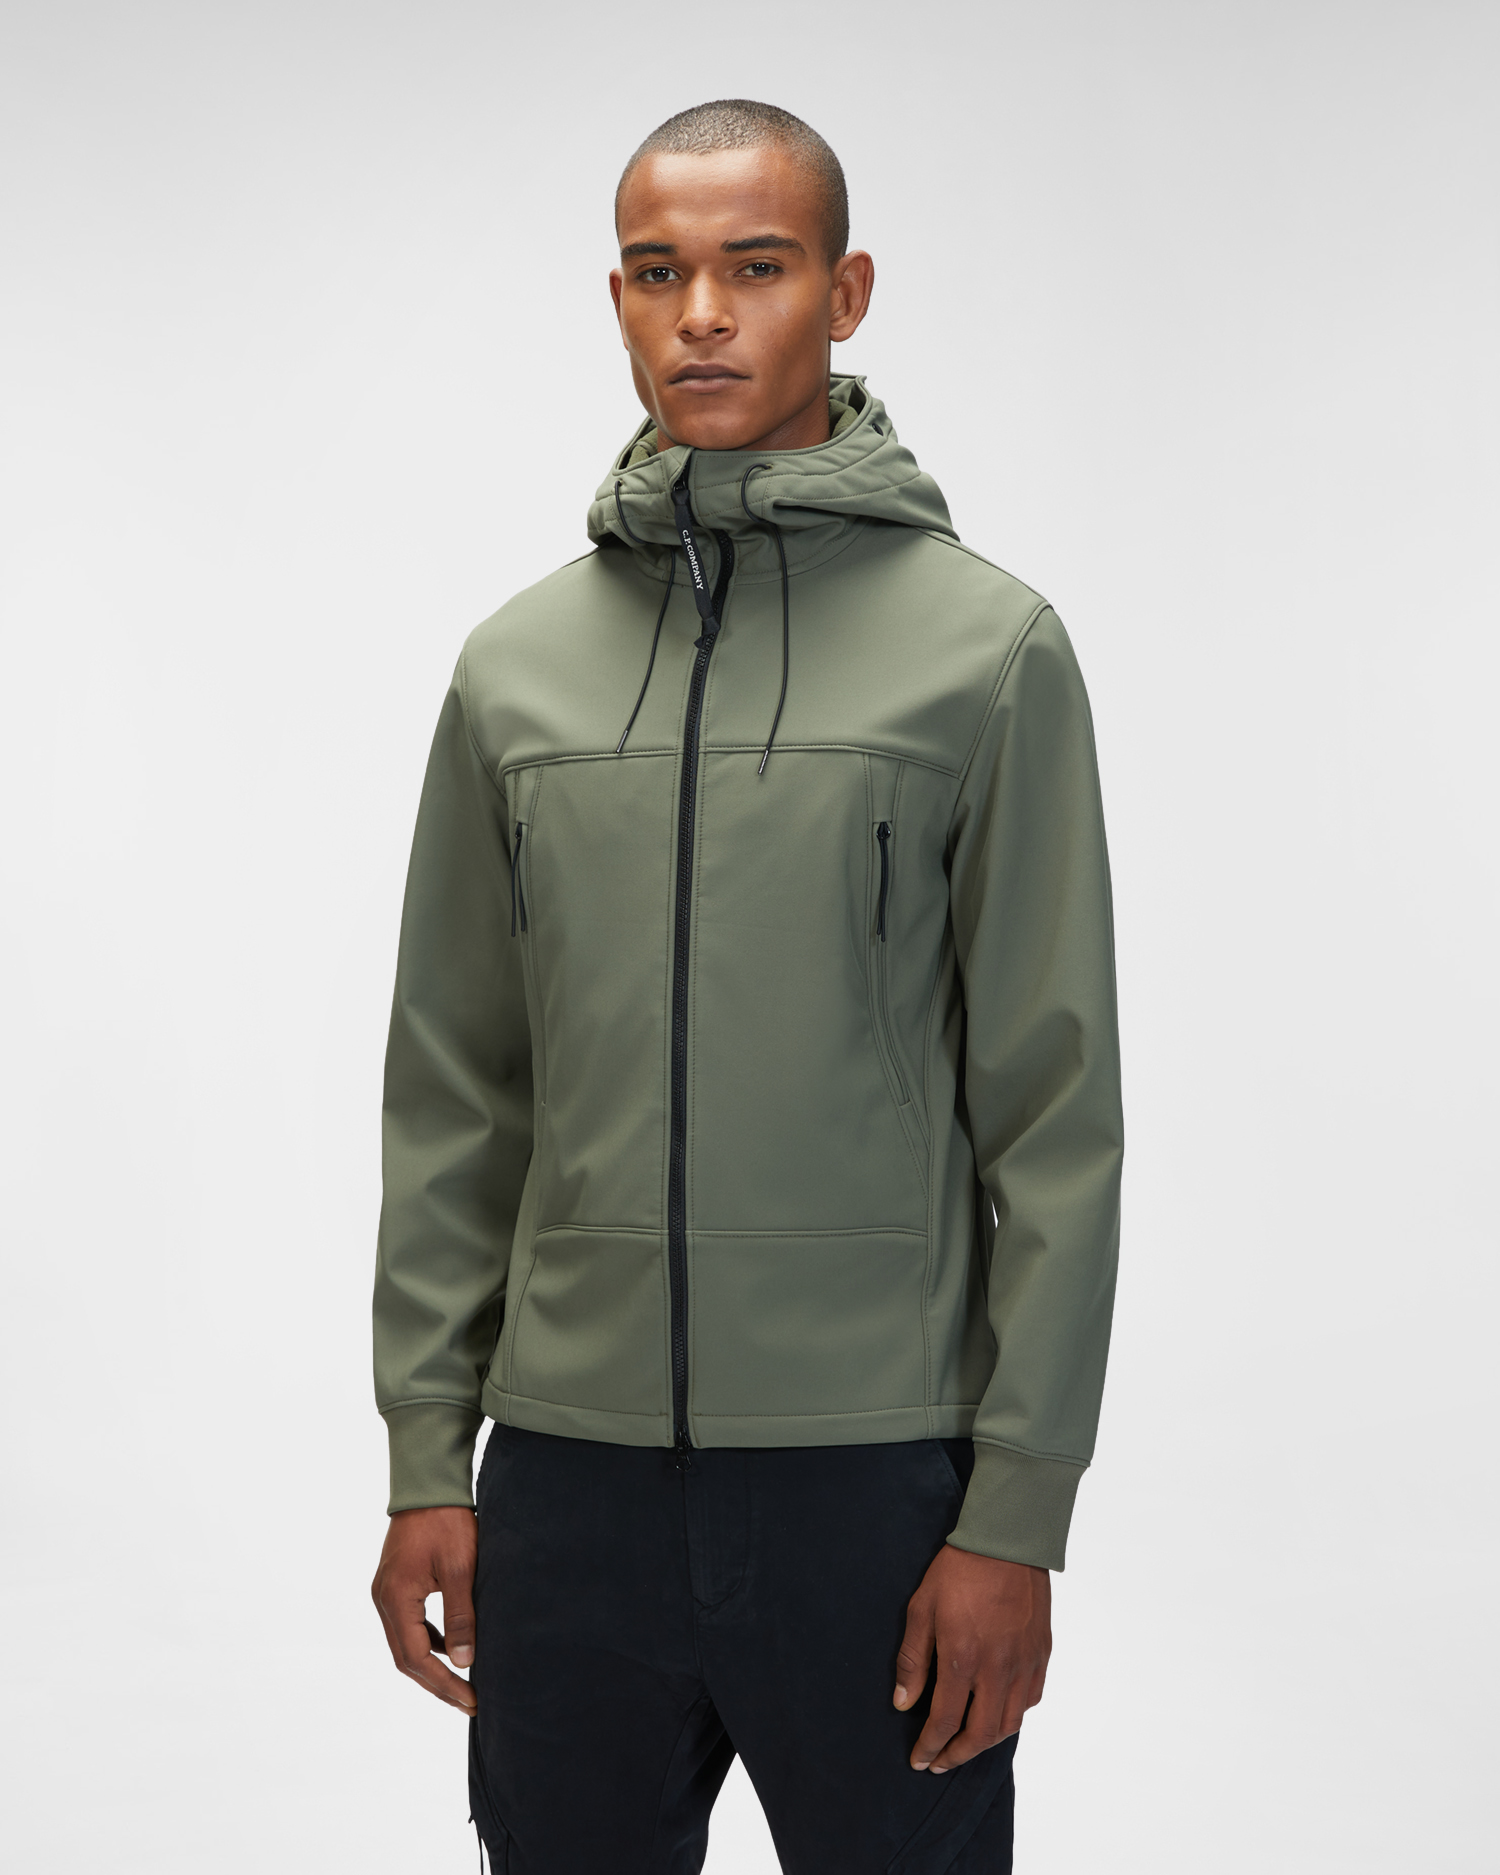 Cp shell jacket